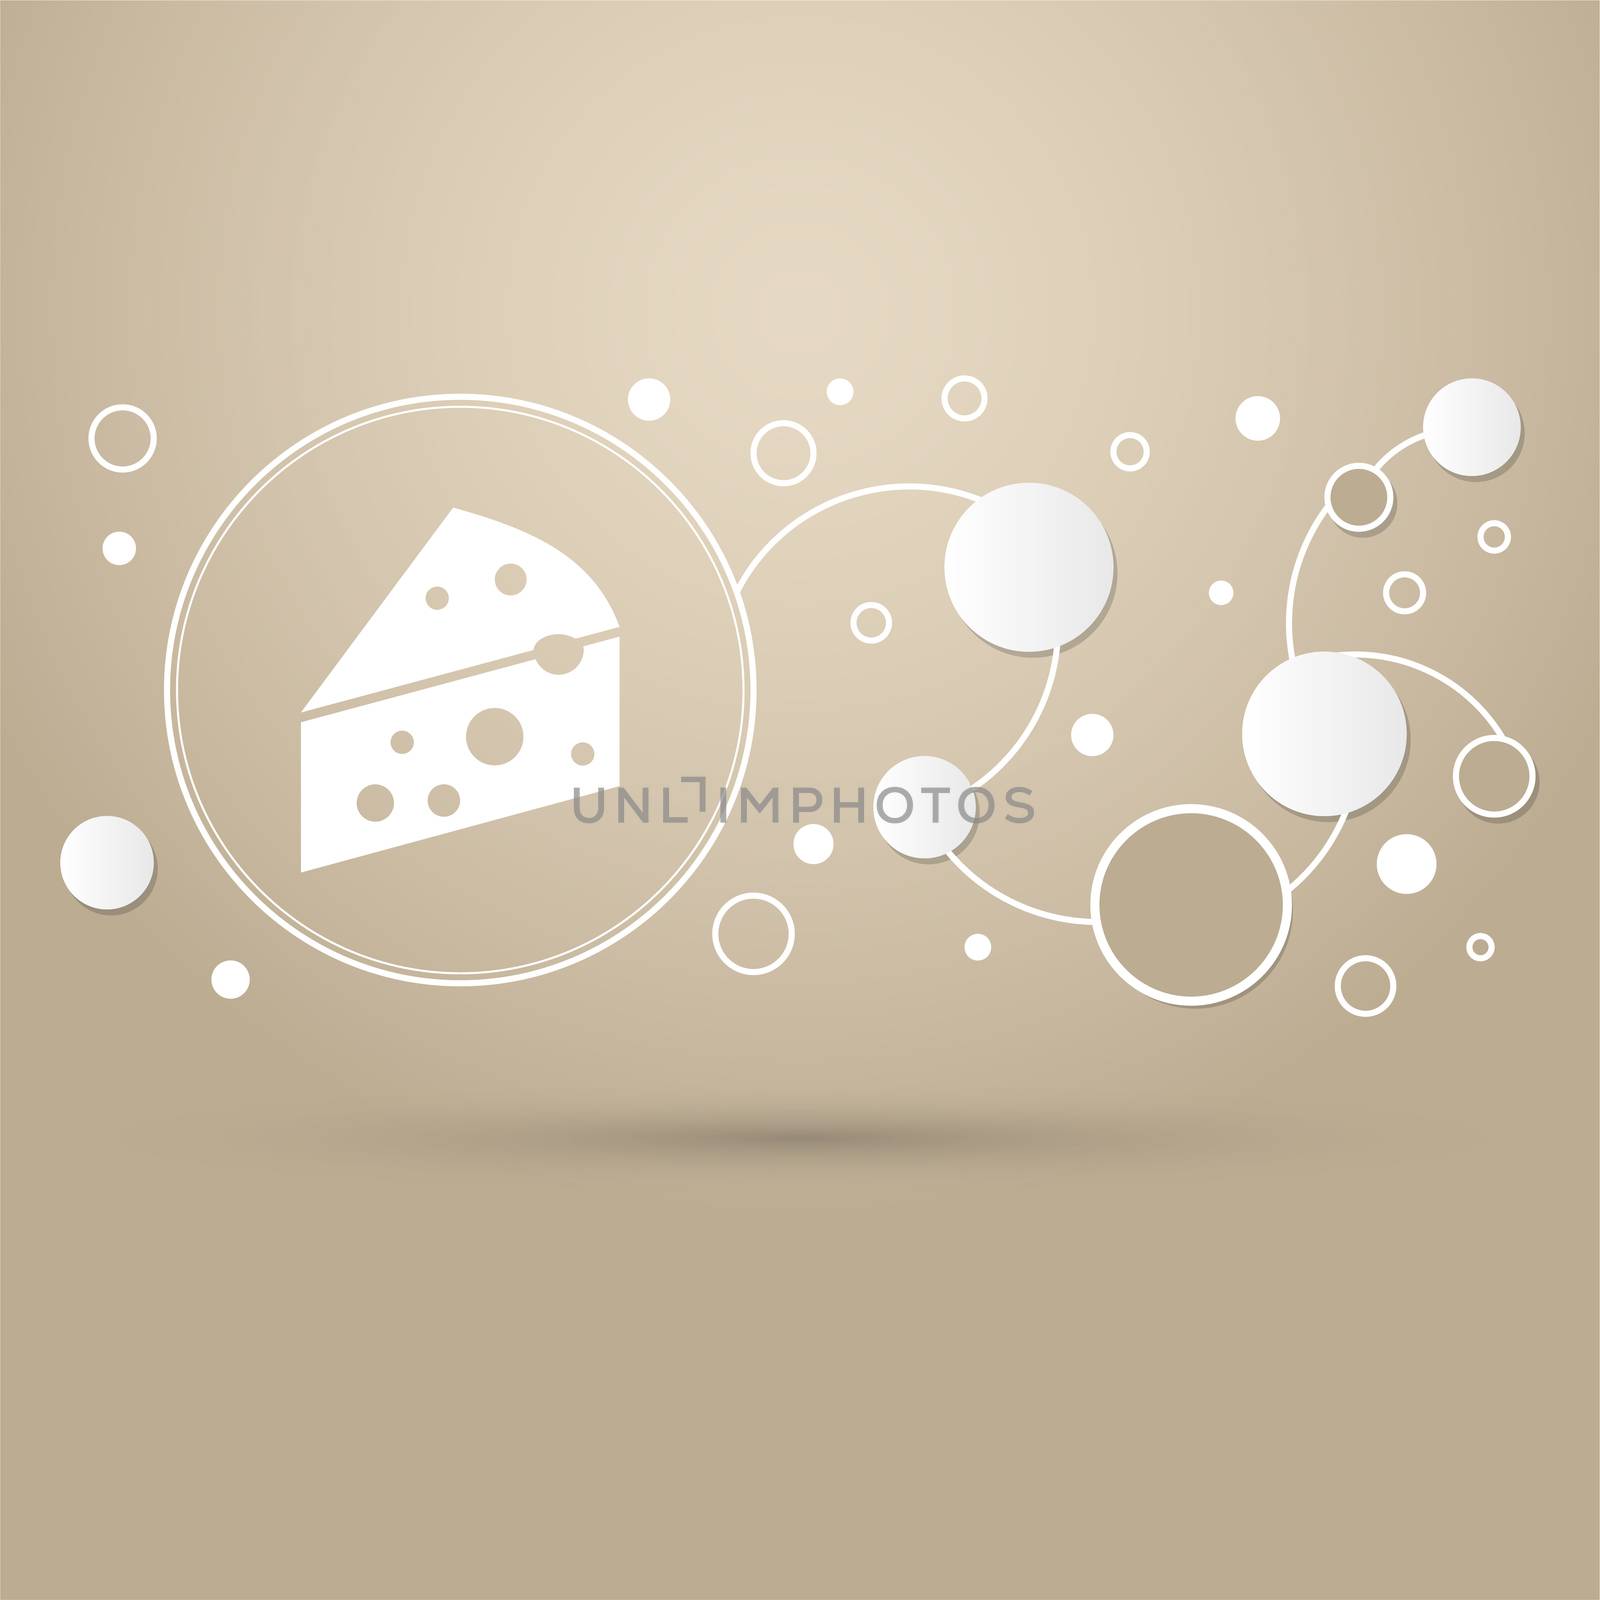 Cheese icon on a brown background with elegant style and modern design infographic. illustration